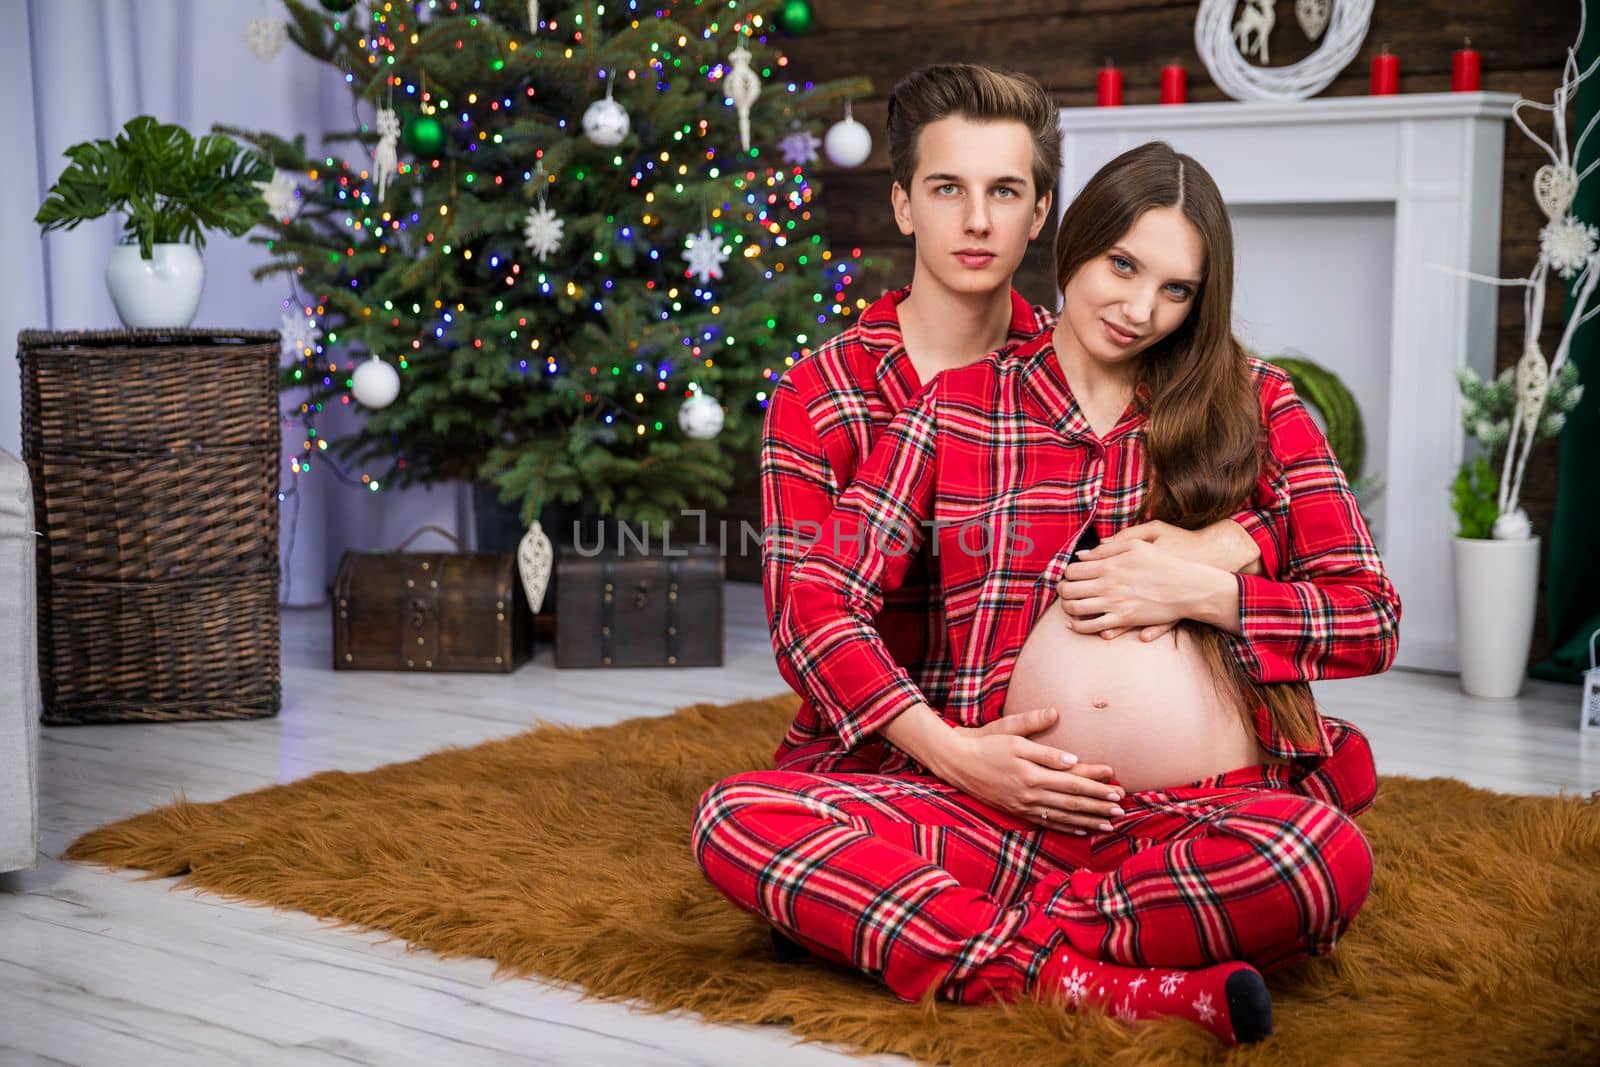 Embracing couple sitting on carpet against background of Christmas tree. The man embraces the pregnant woman from behind. The woman sits with her legs crossed and exposes her pregnant belly.